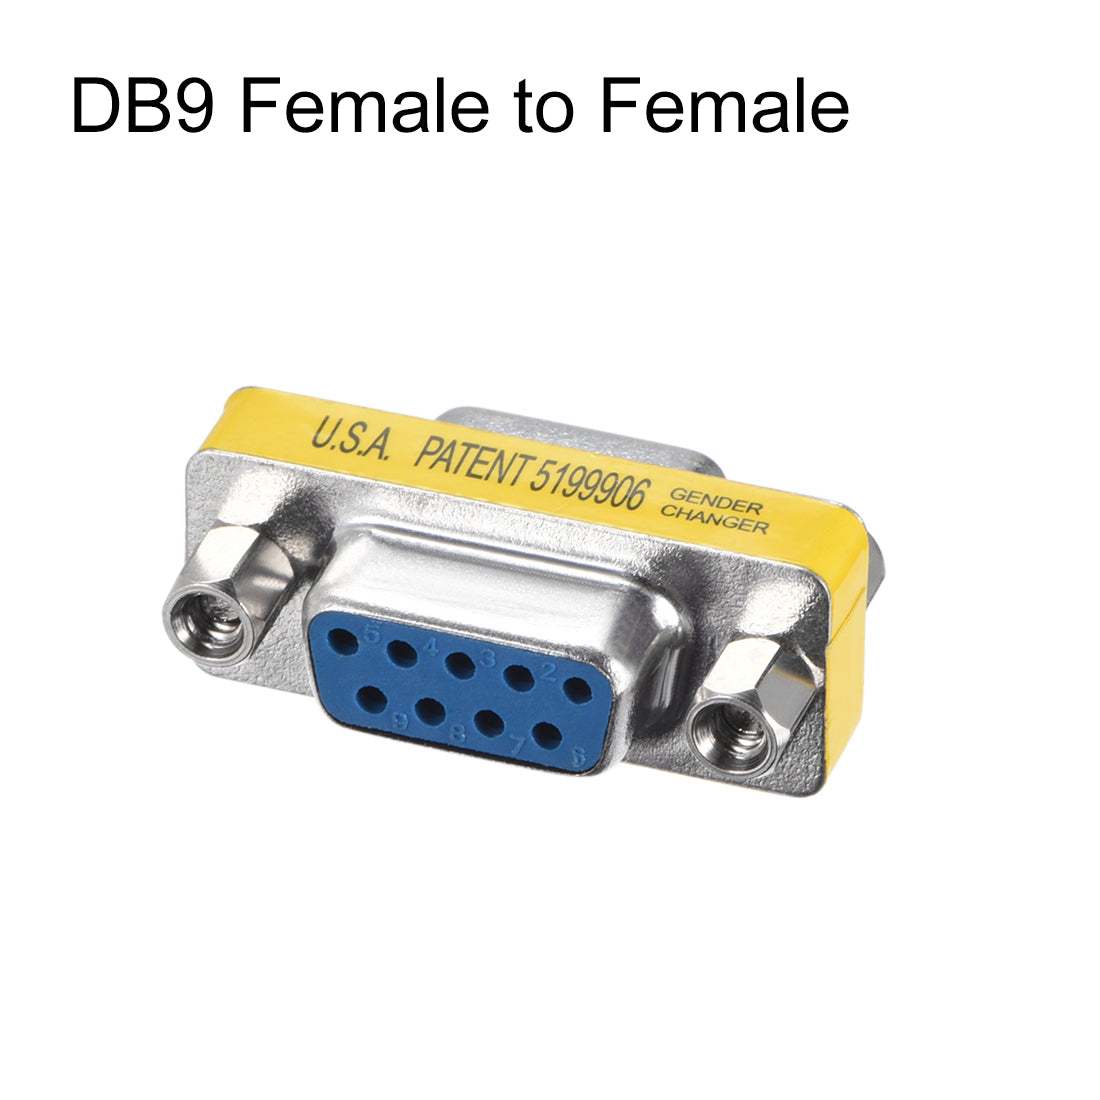 uxcell Uxcell DB9 VGA Gender Changer 9 Pin Female to Female 2-row Mini Gender Changer Coupler Adapter Connector for Serial Applications Blue